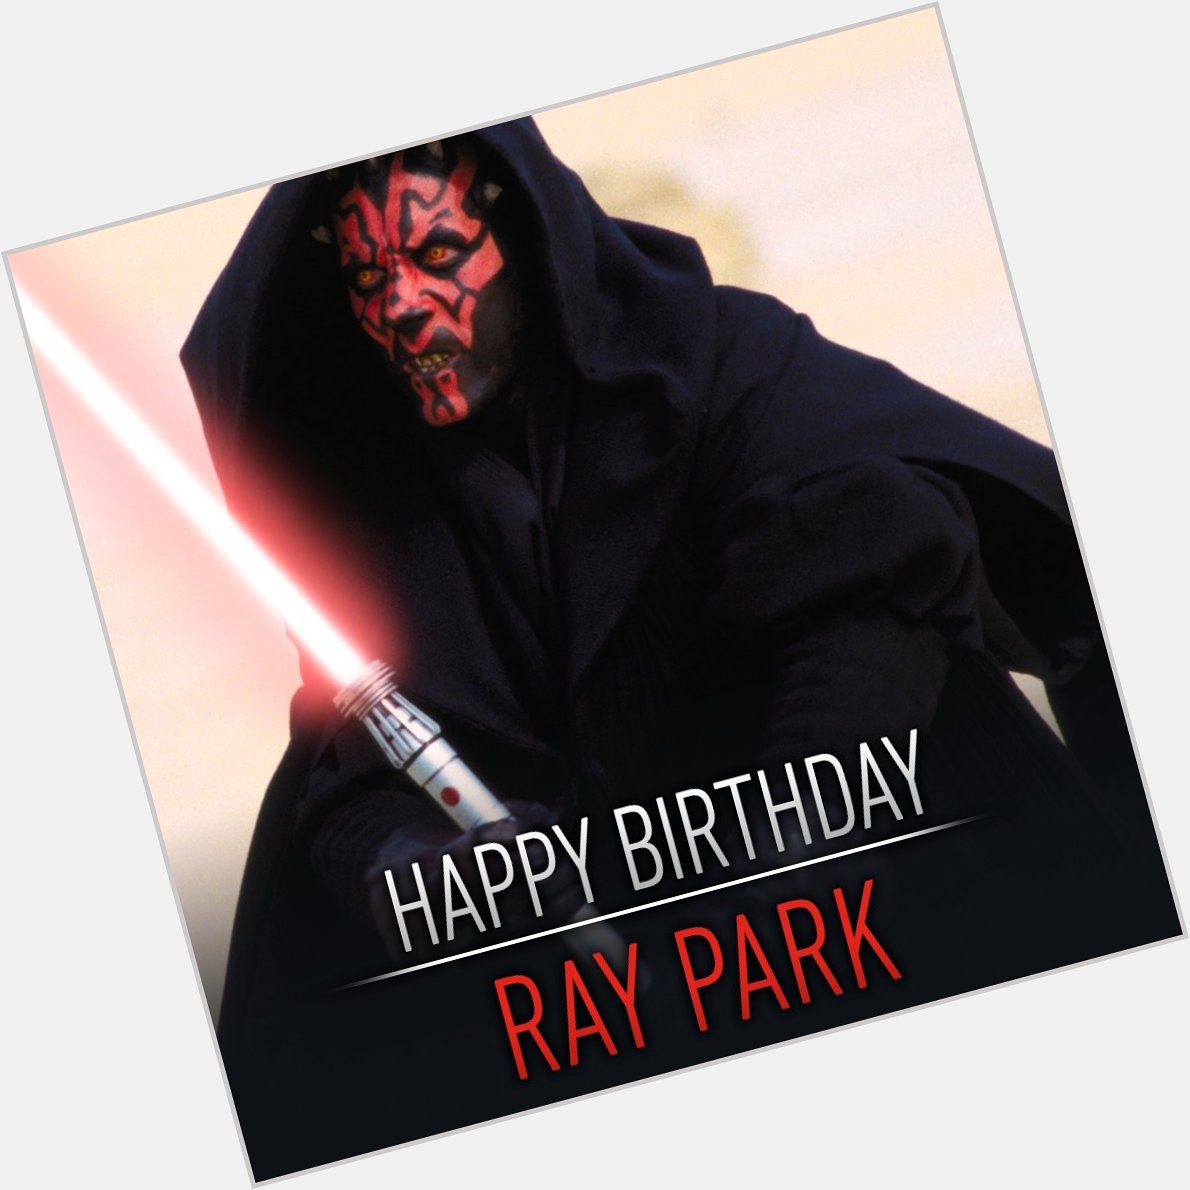 Happy birthday to Ray Park the man behind the fearsome Darth Maul! 